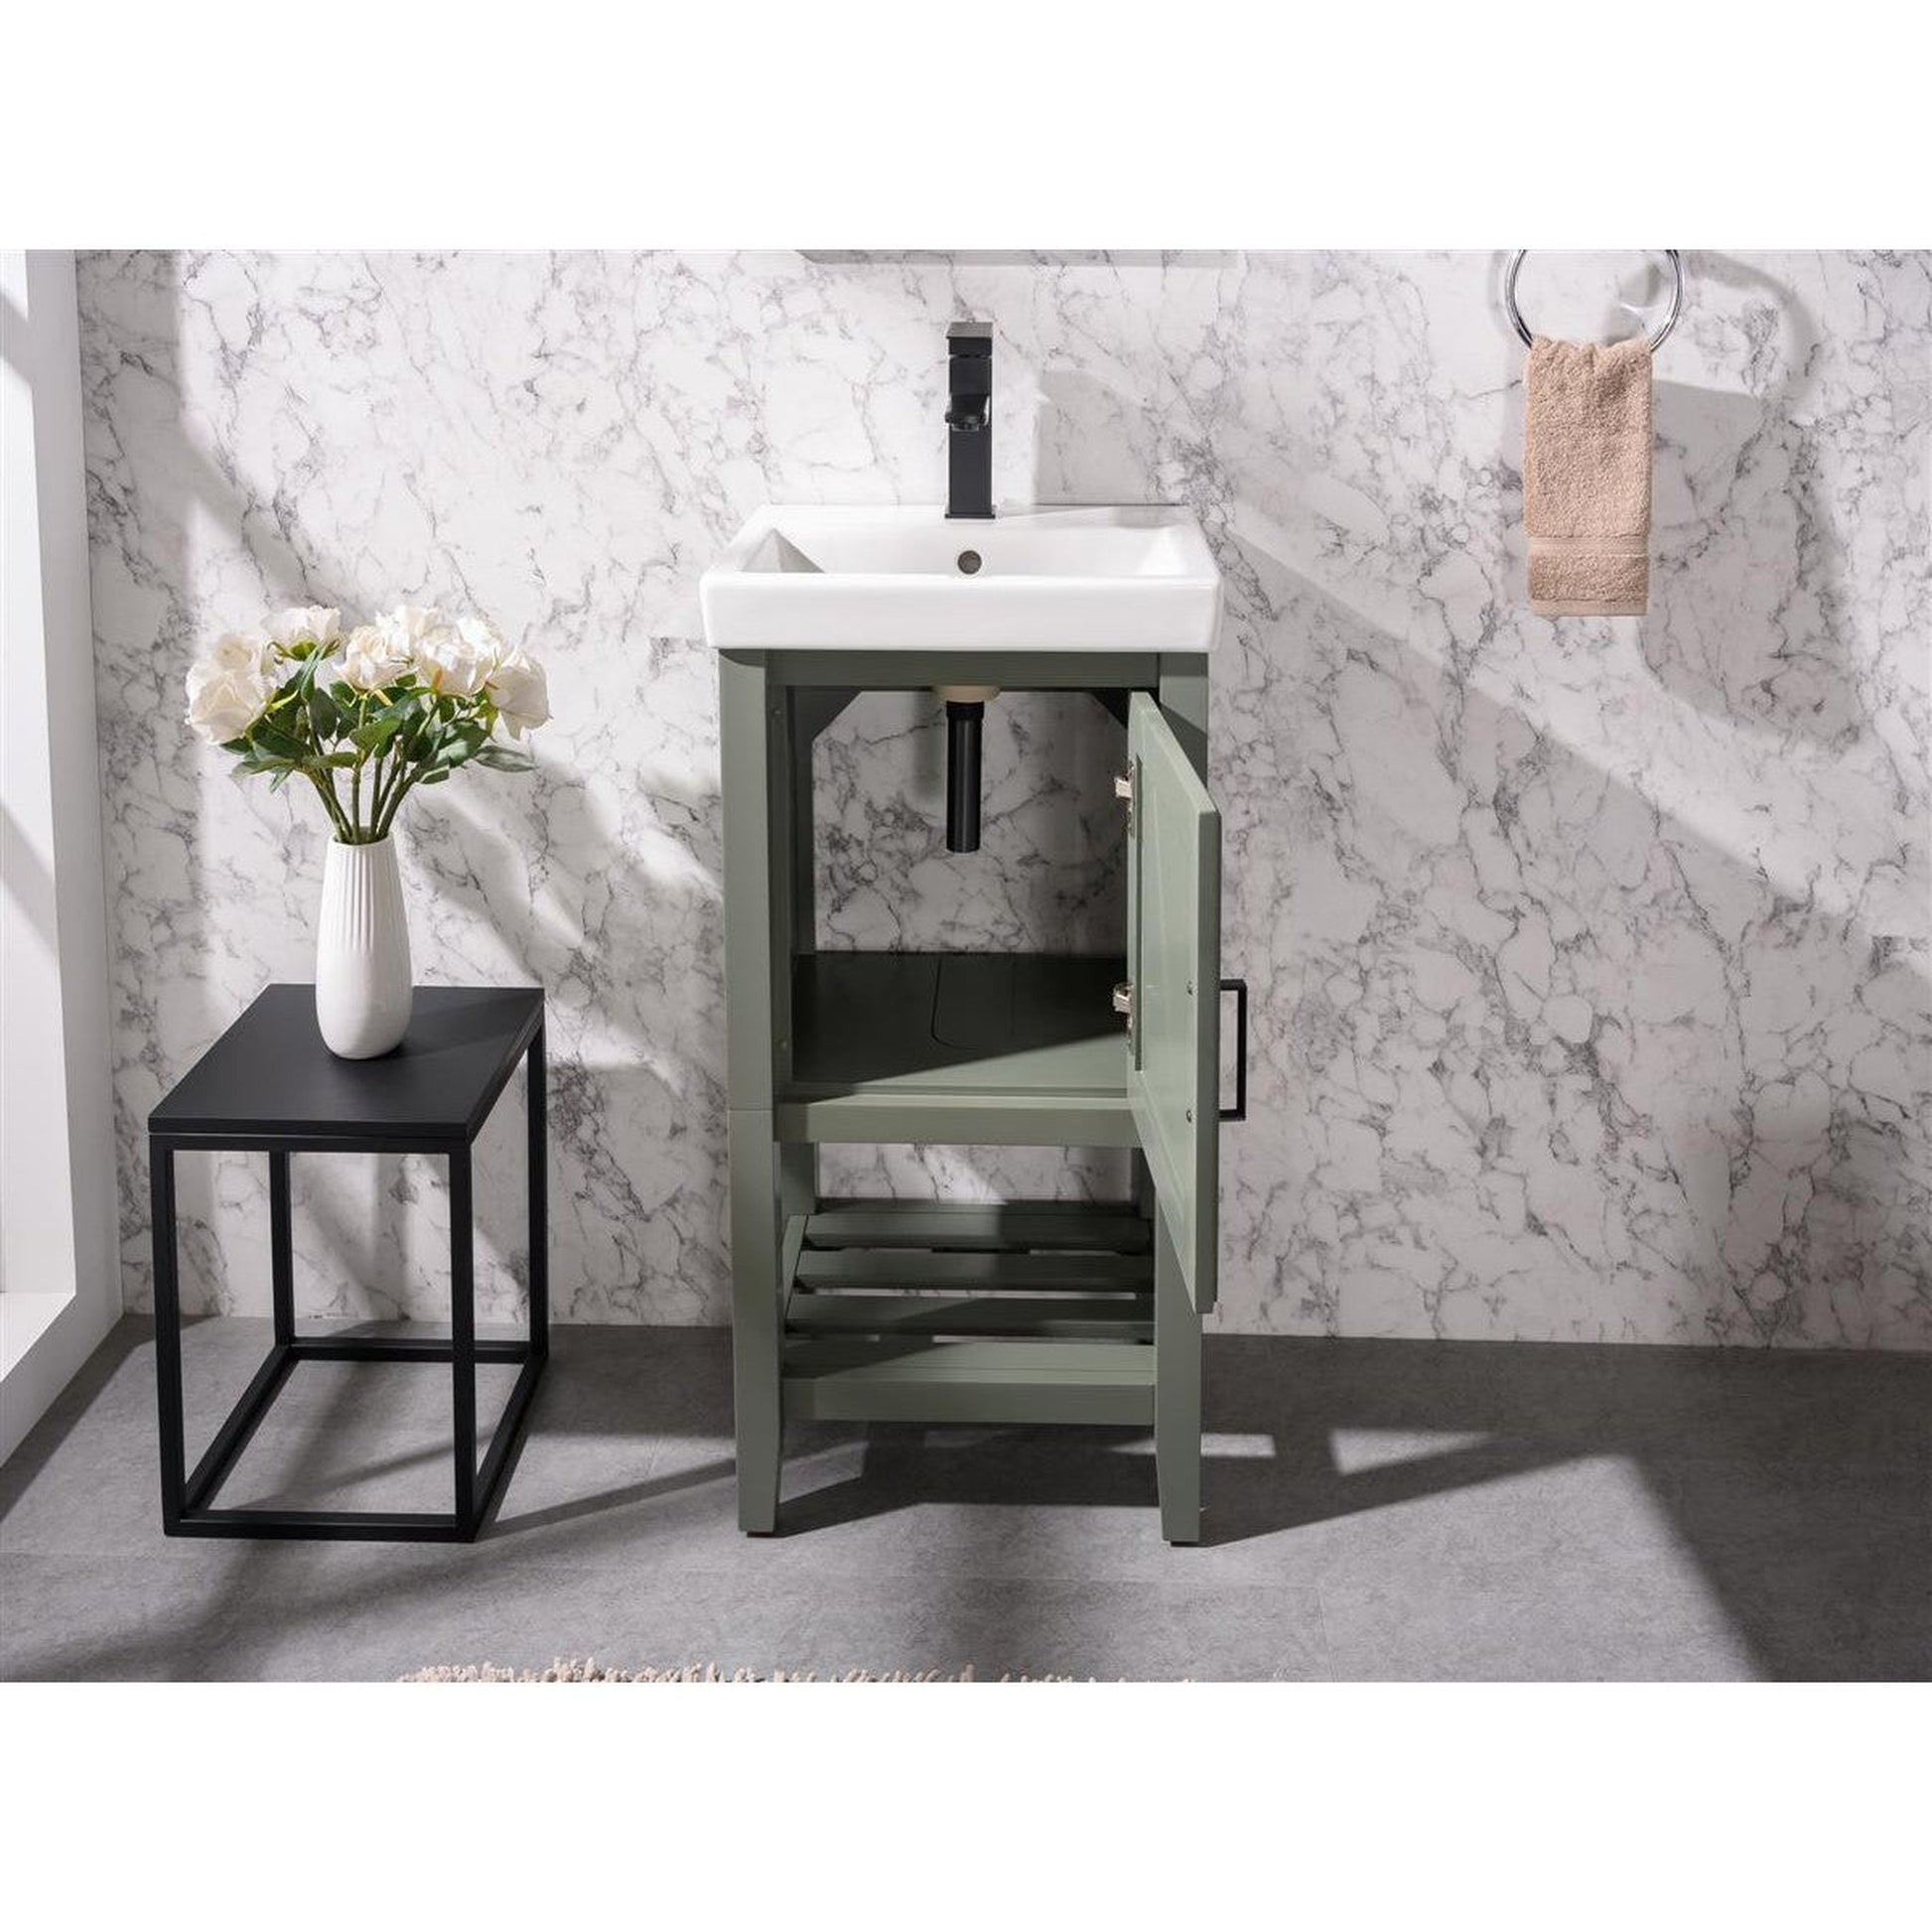 Legion Furniture WLF9018 18" Pewter Green Freestanding Vanity Cabinet With White Ceramic Top and Sink